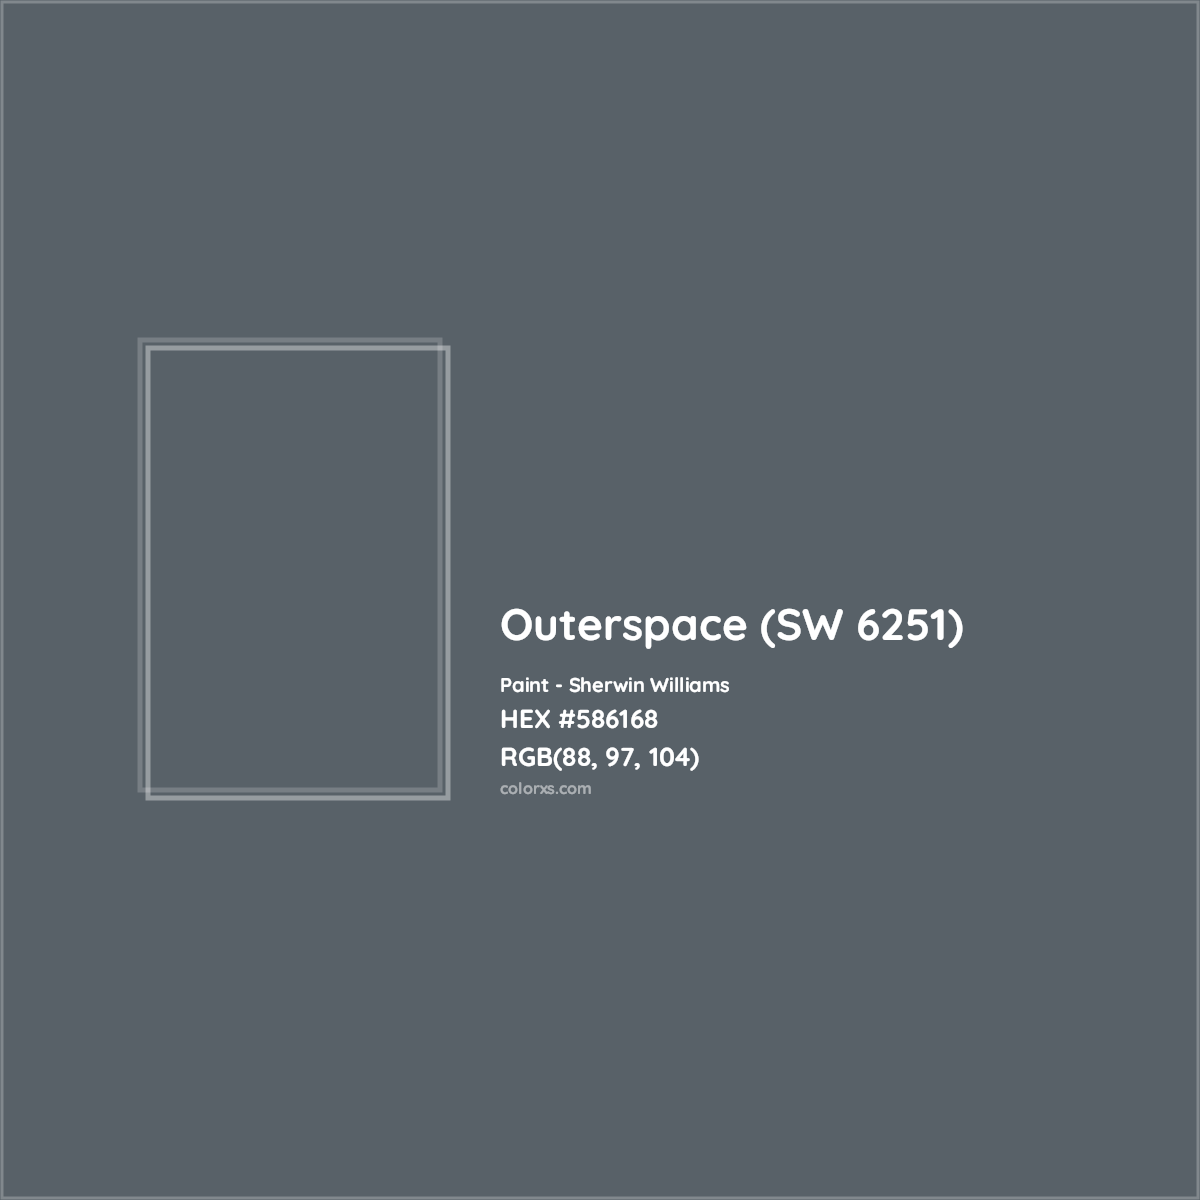 HEX #586168 Outerspace (SW 6251) Paint Sherwin Williams - Color Code